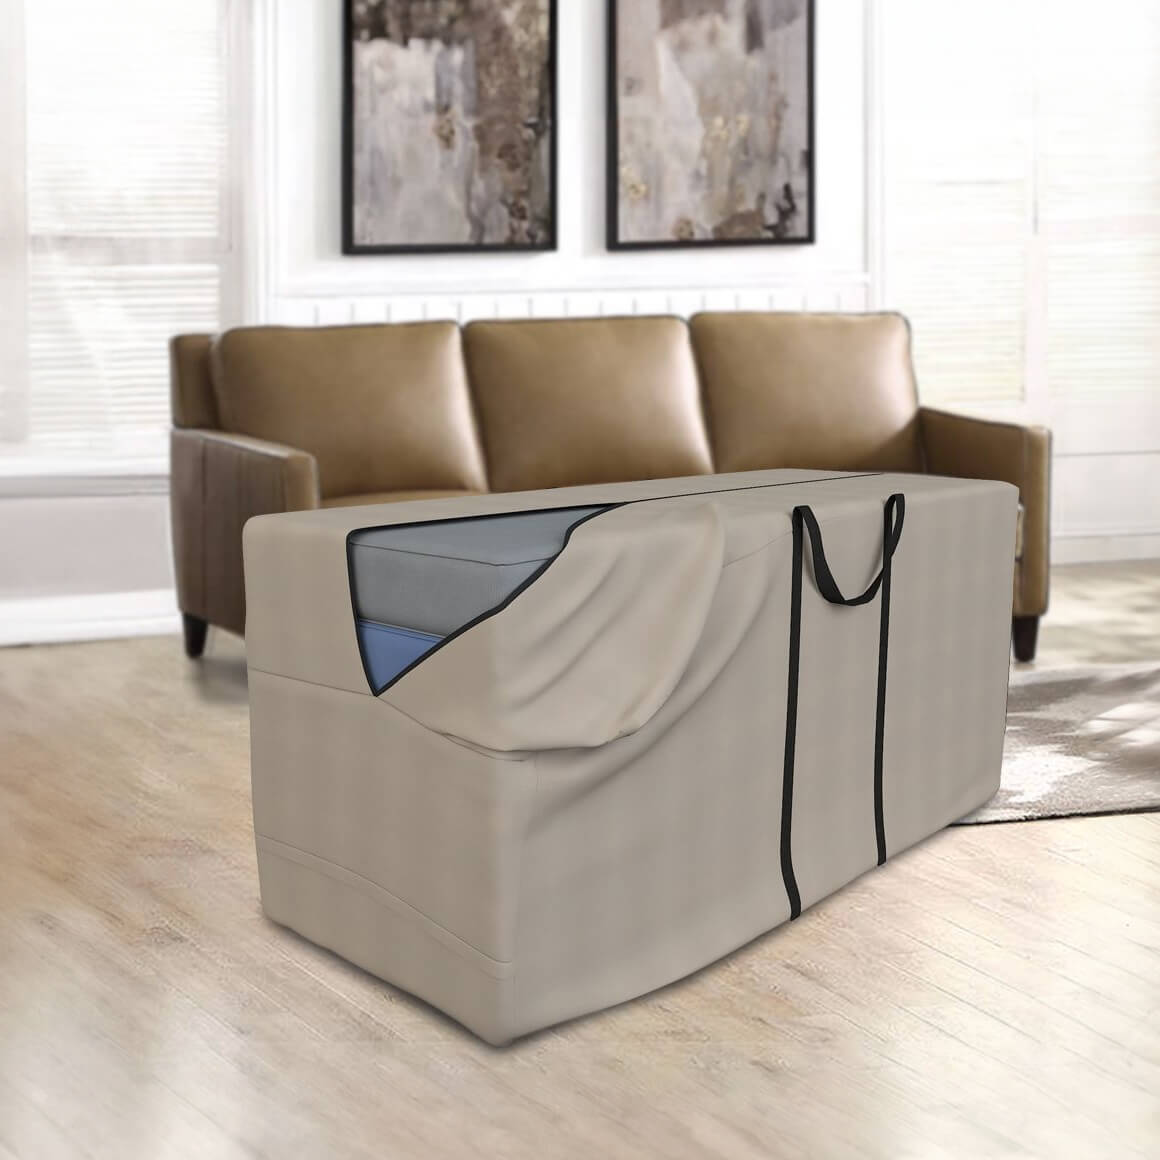 Storing Your Outdoor Furniture Covers